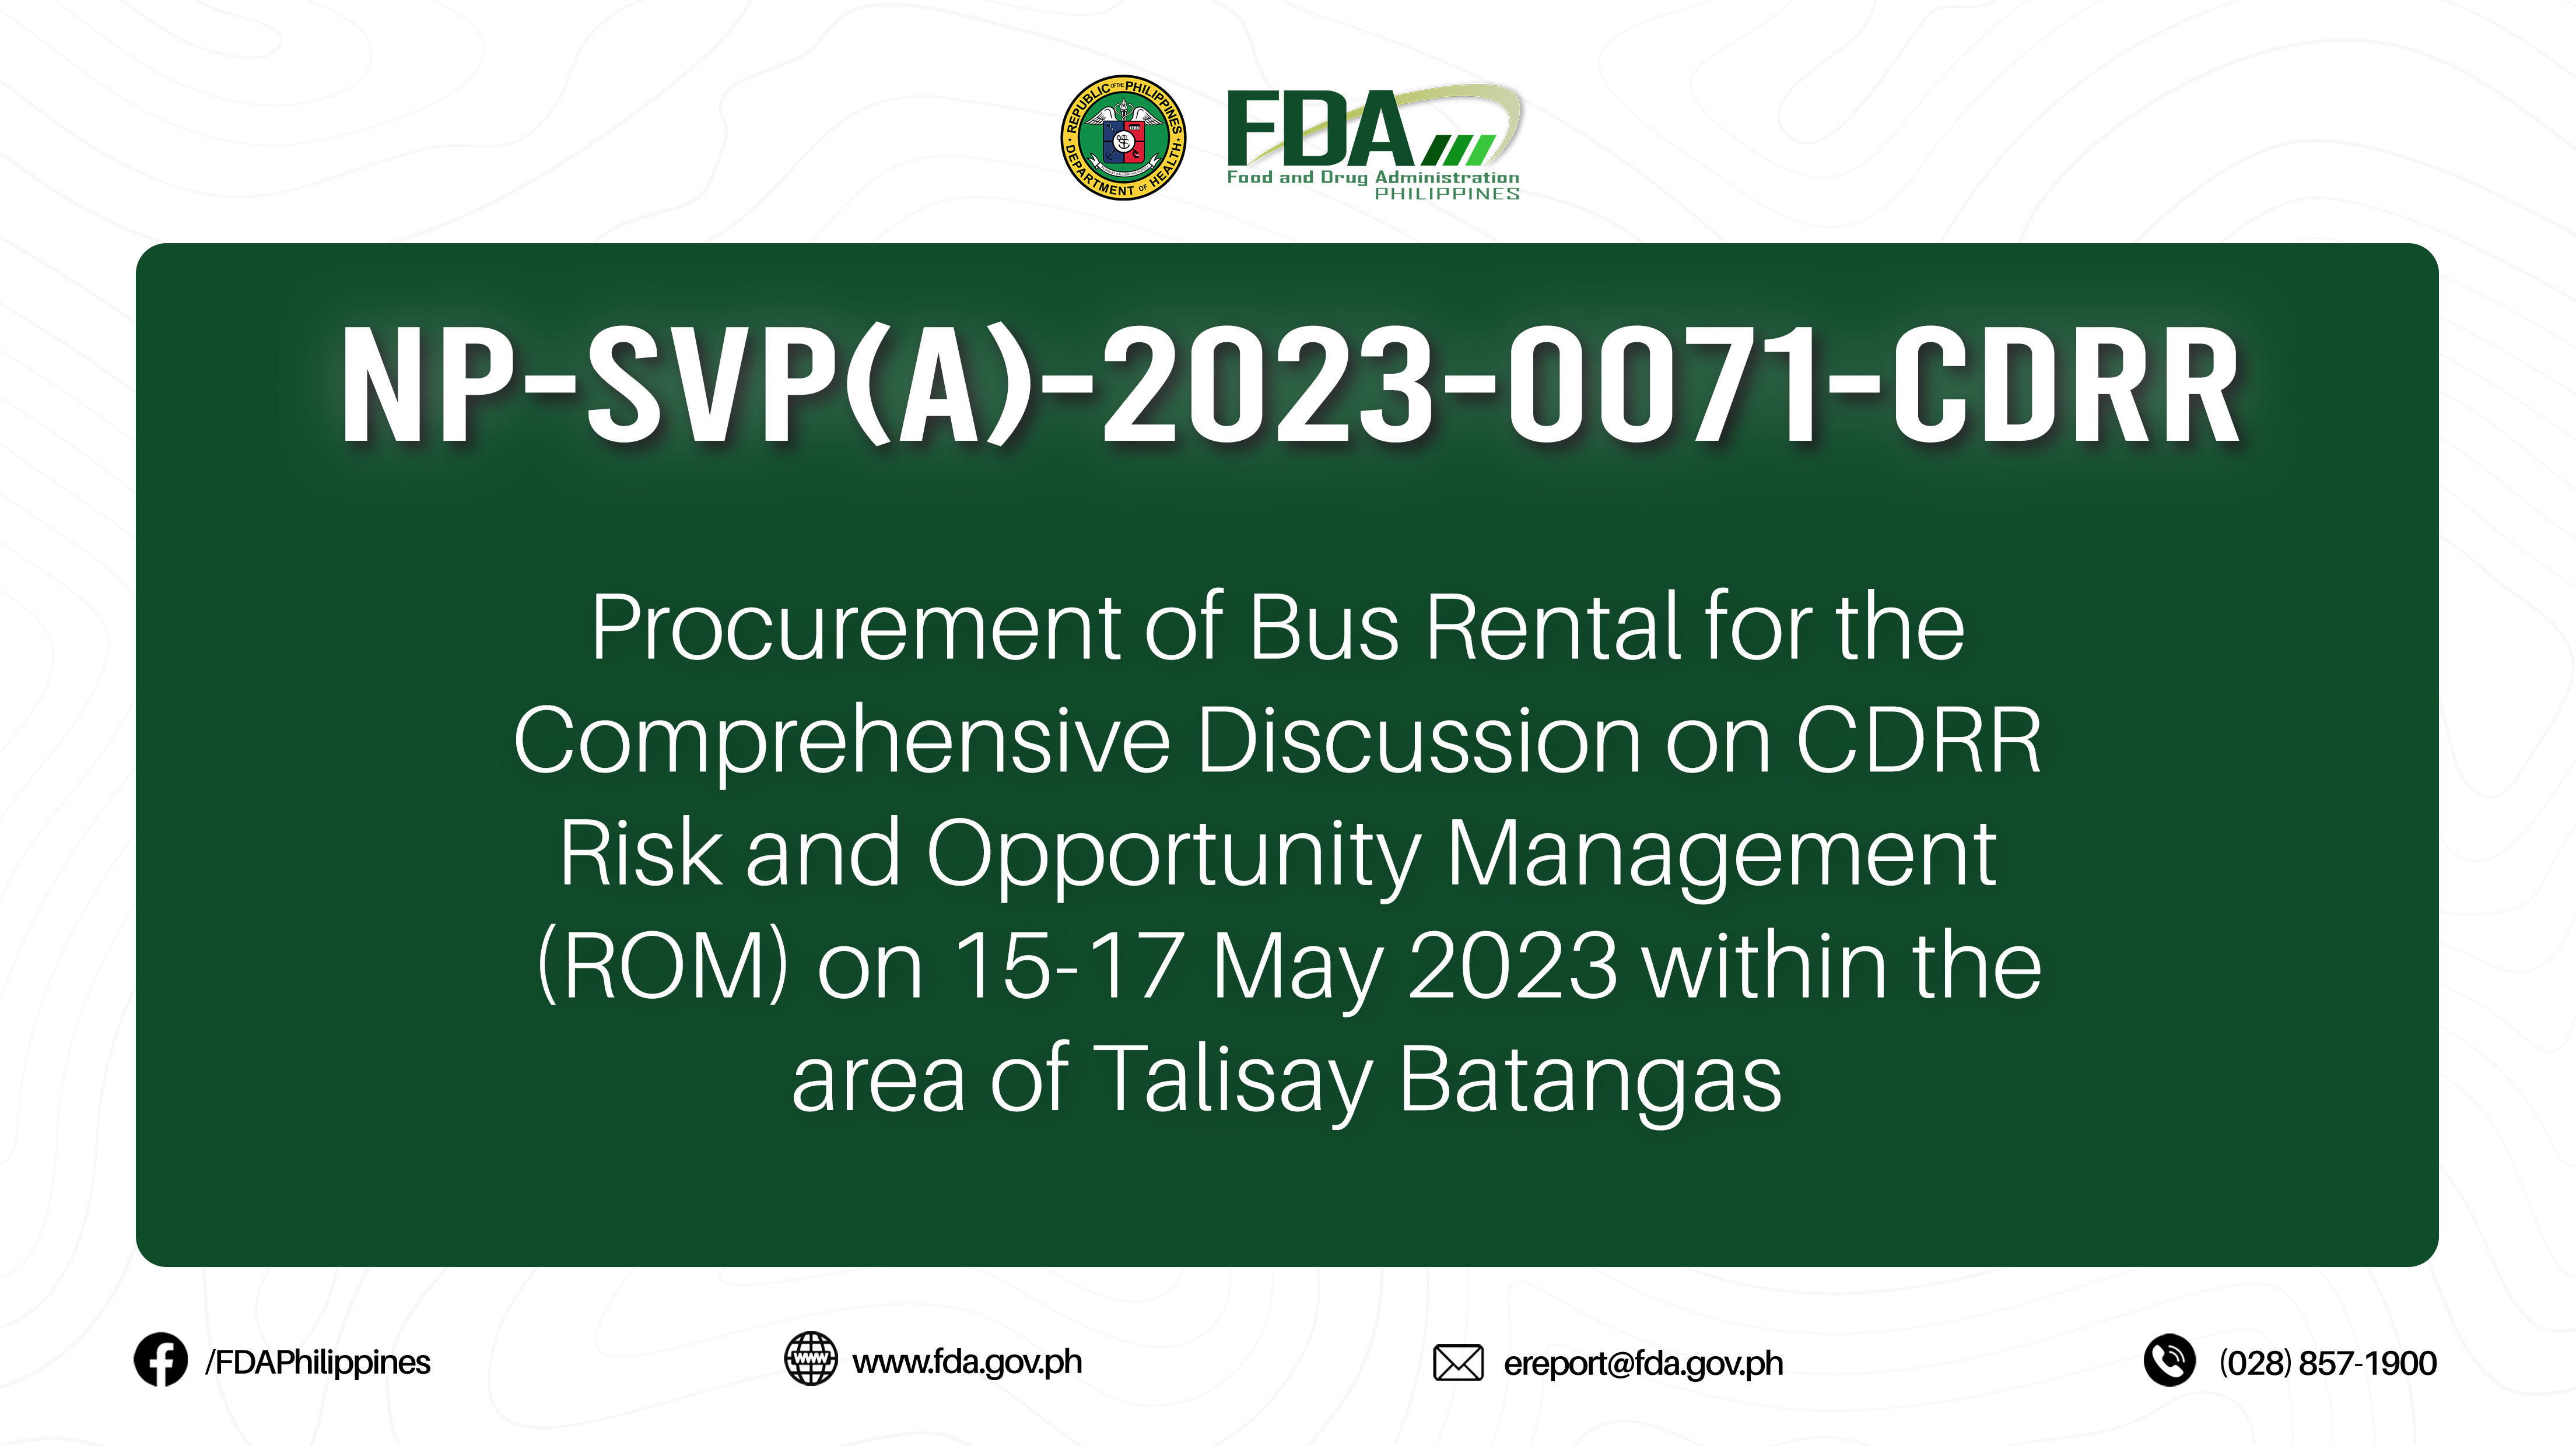 NP-SVP(A)-2023-0071-CDRR || Procurement of Bus Rental for the Comprehensive Discussion on CDRR Risk and Opportunity Management (ROM) on 15-17 May 2023 within the area of  Talisay Batangas